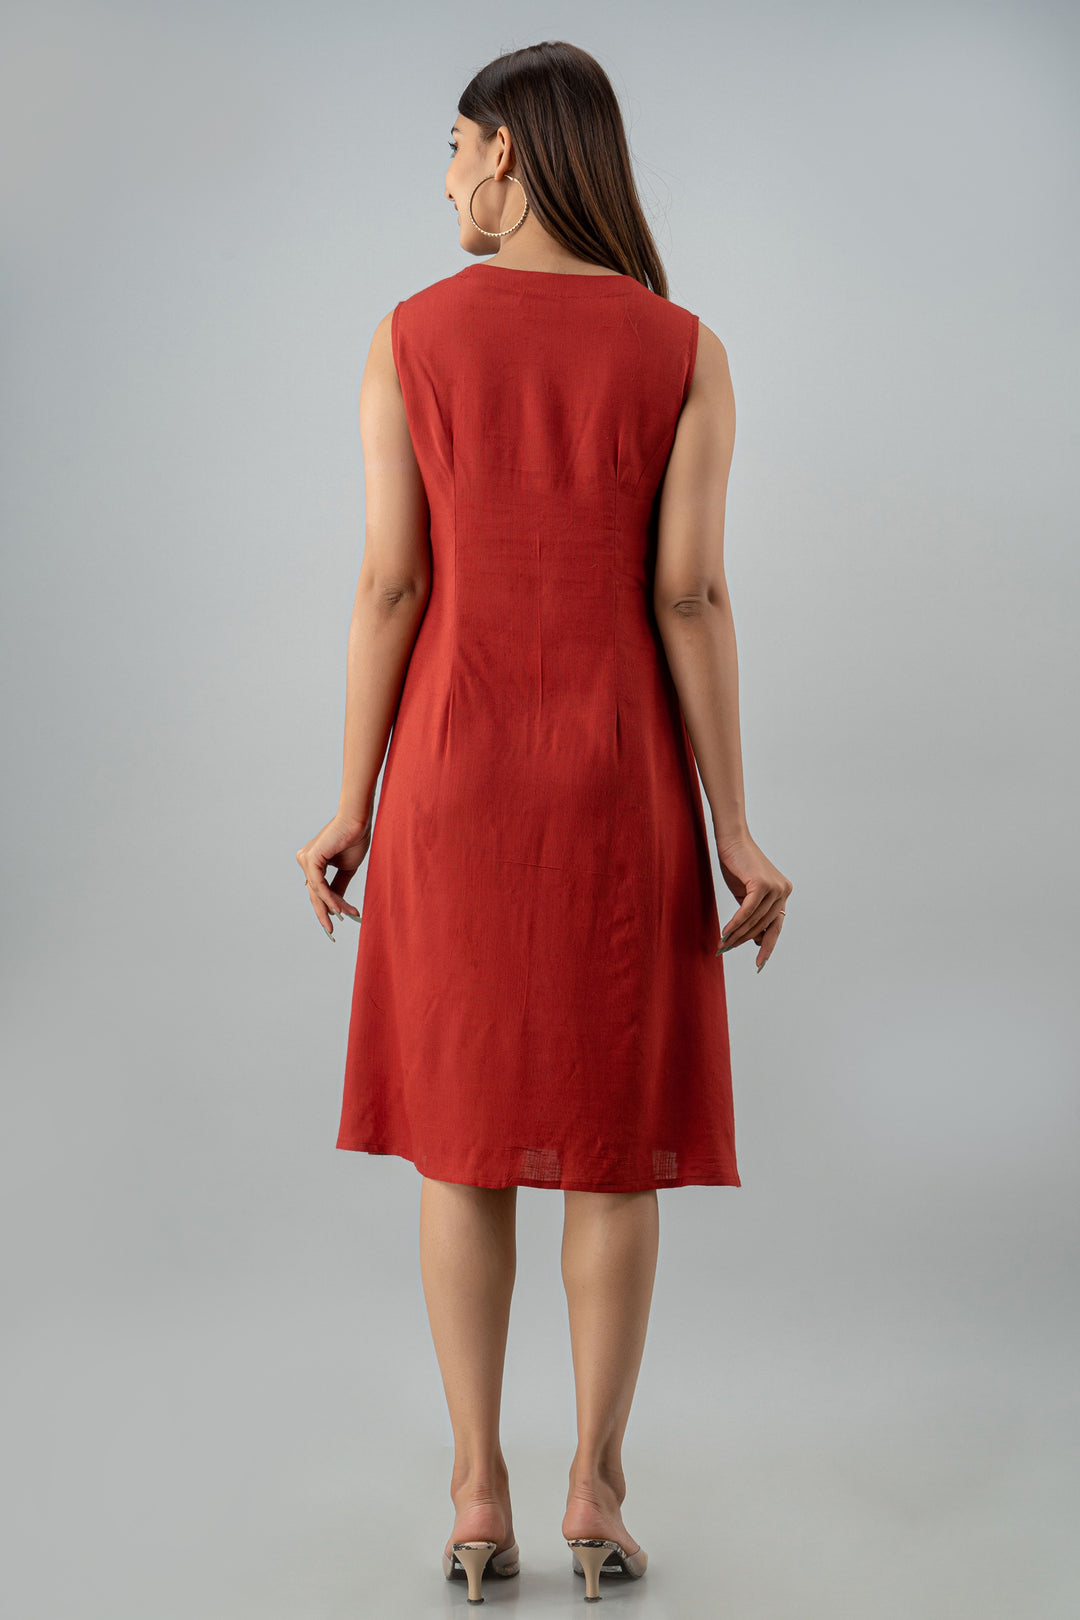 Red Color Rayon A-line Women Short Dress